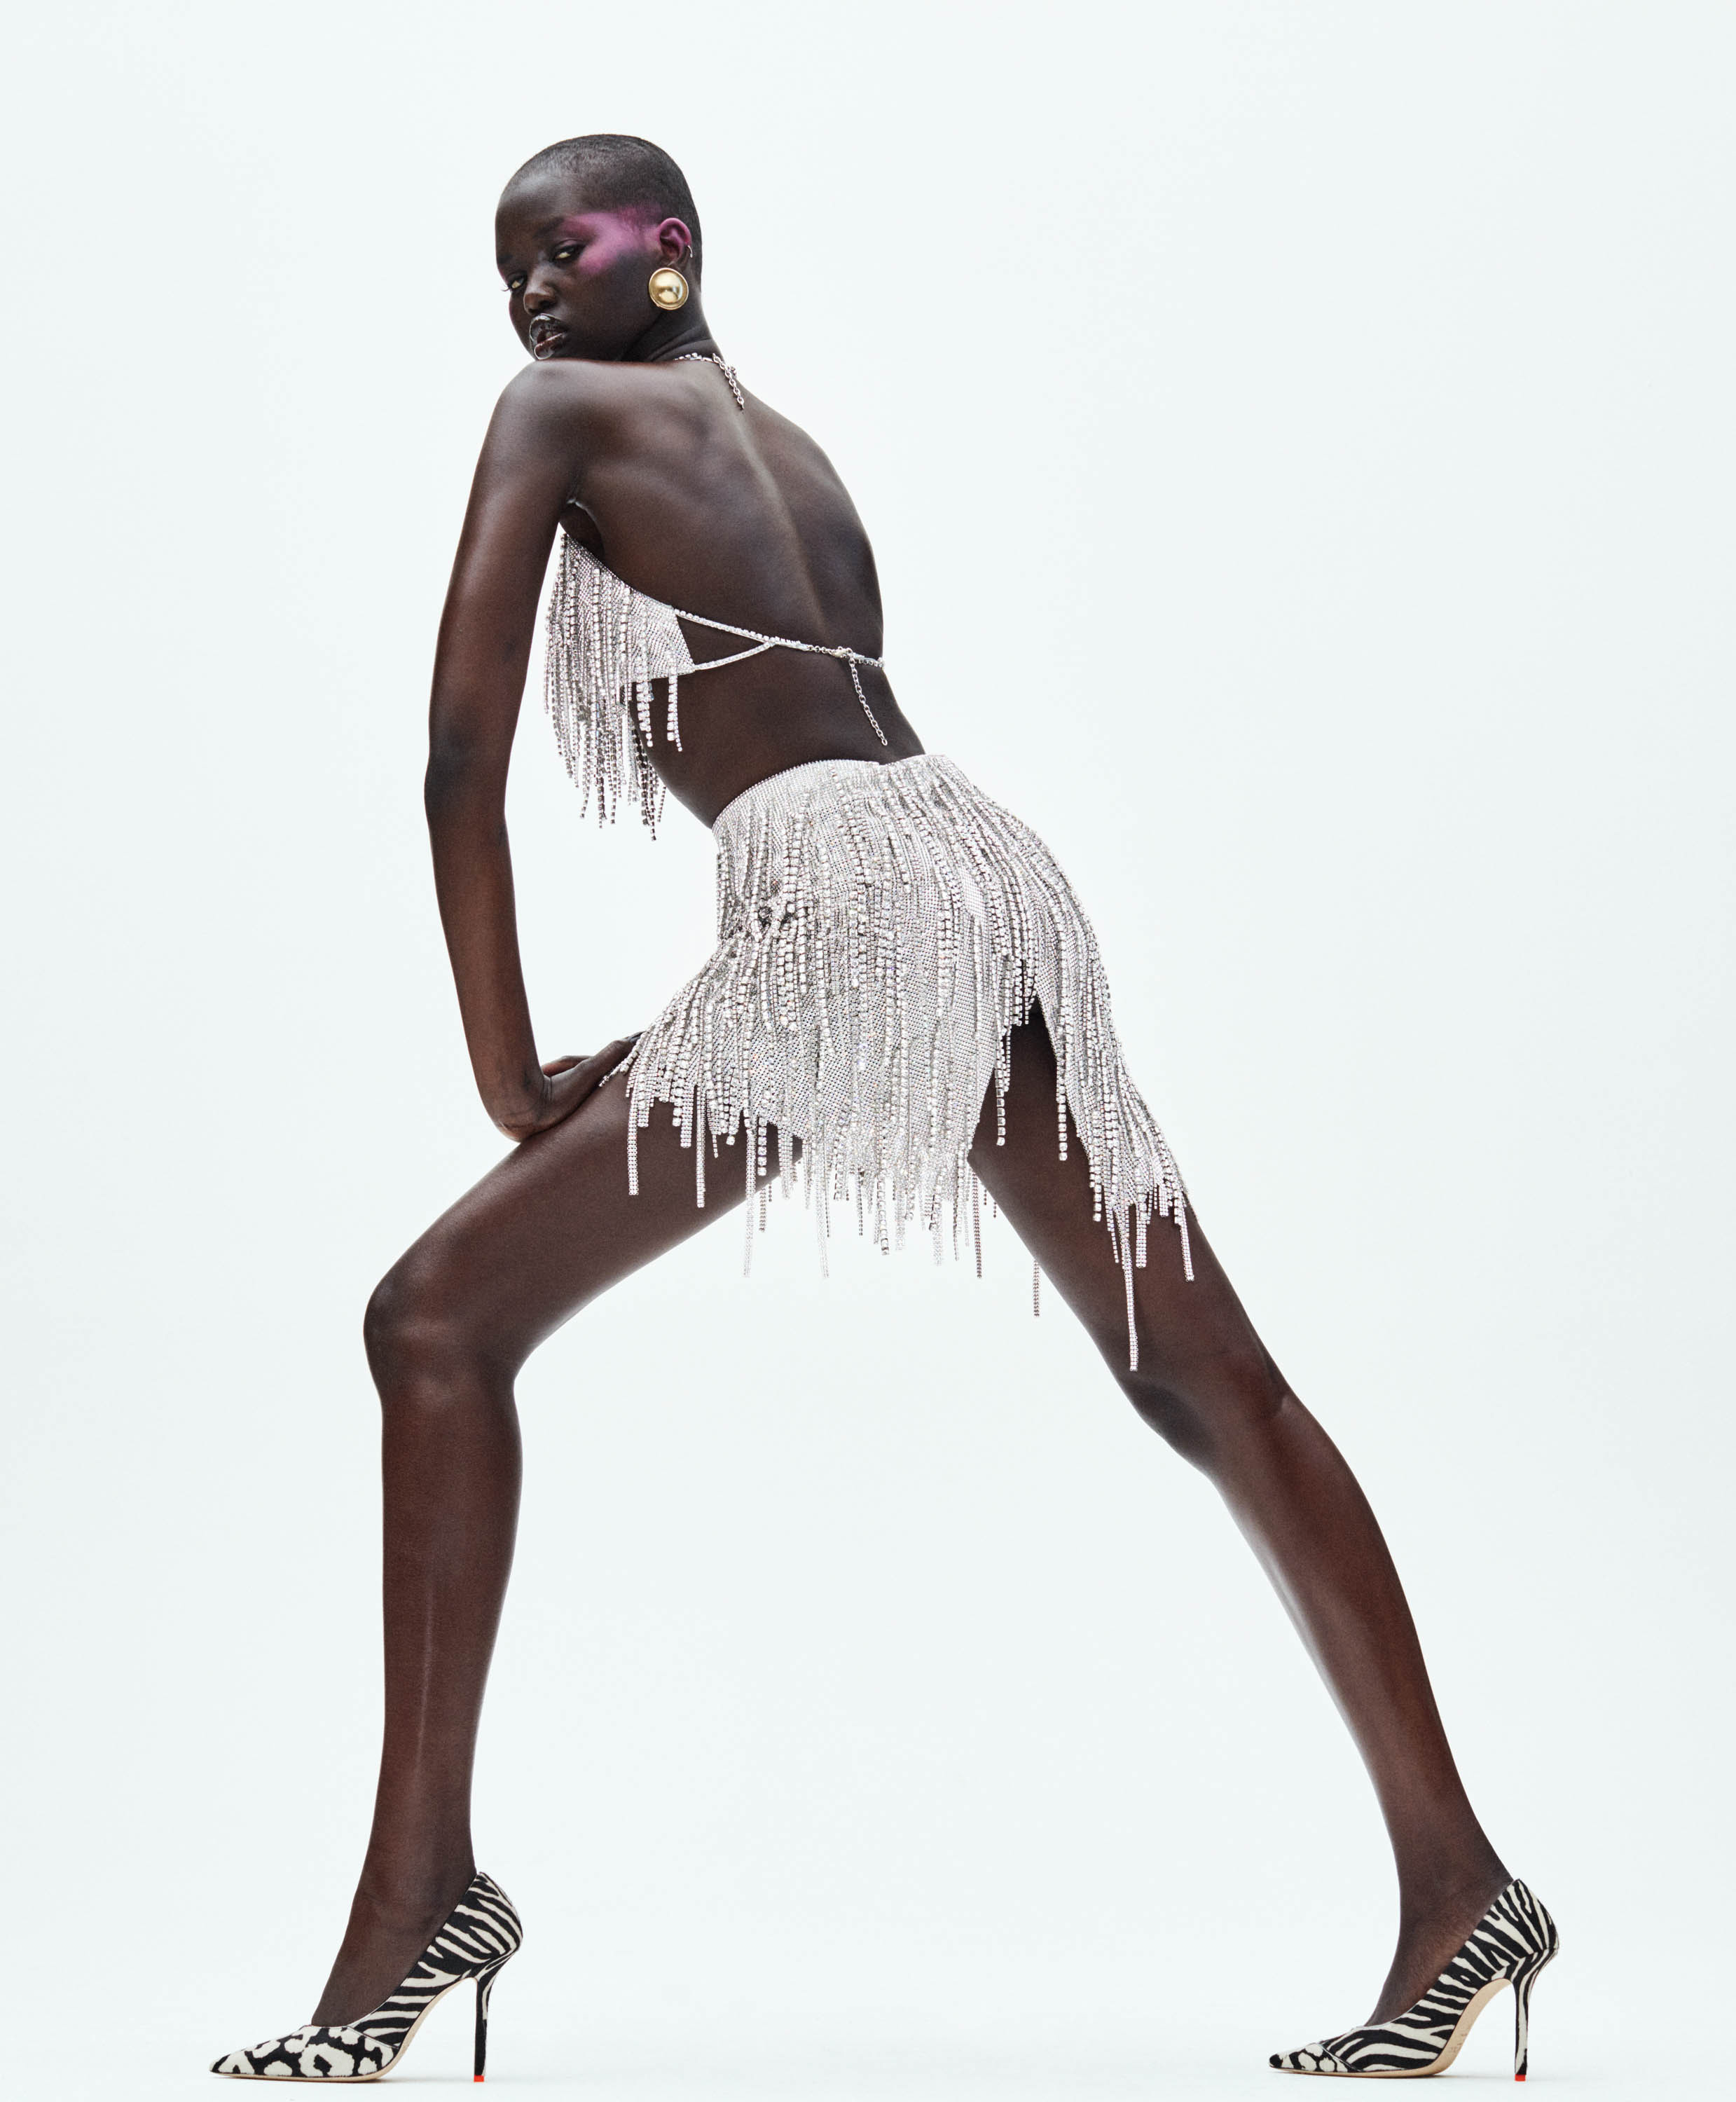 Photos n°2 : Adut Akech and her Mile Long Legs